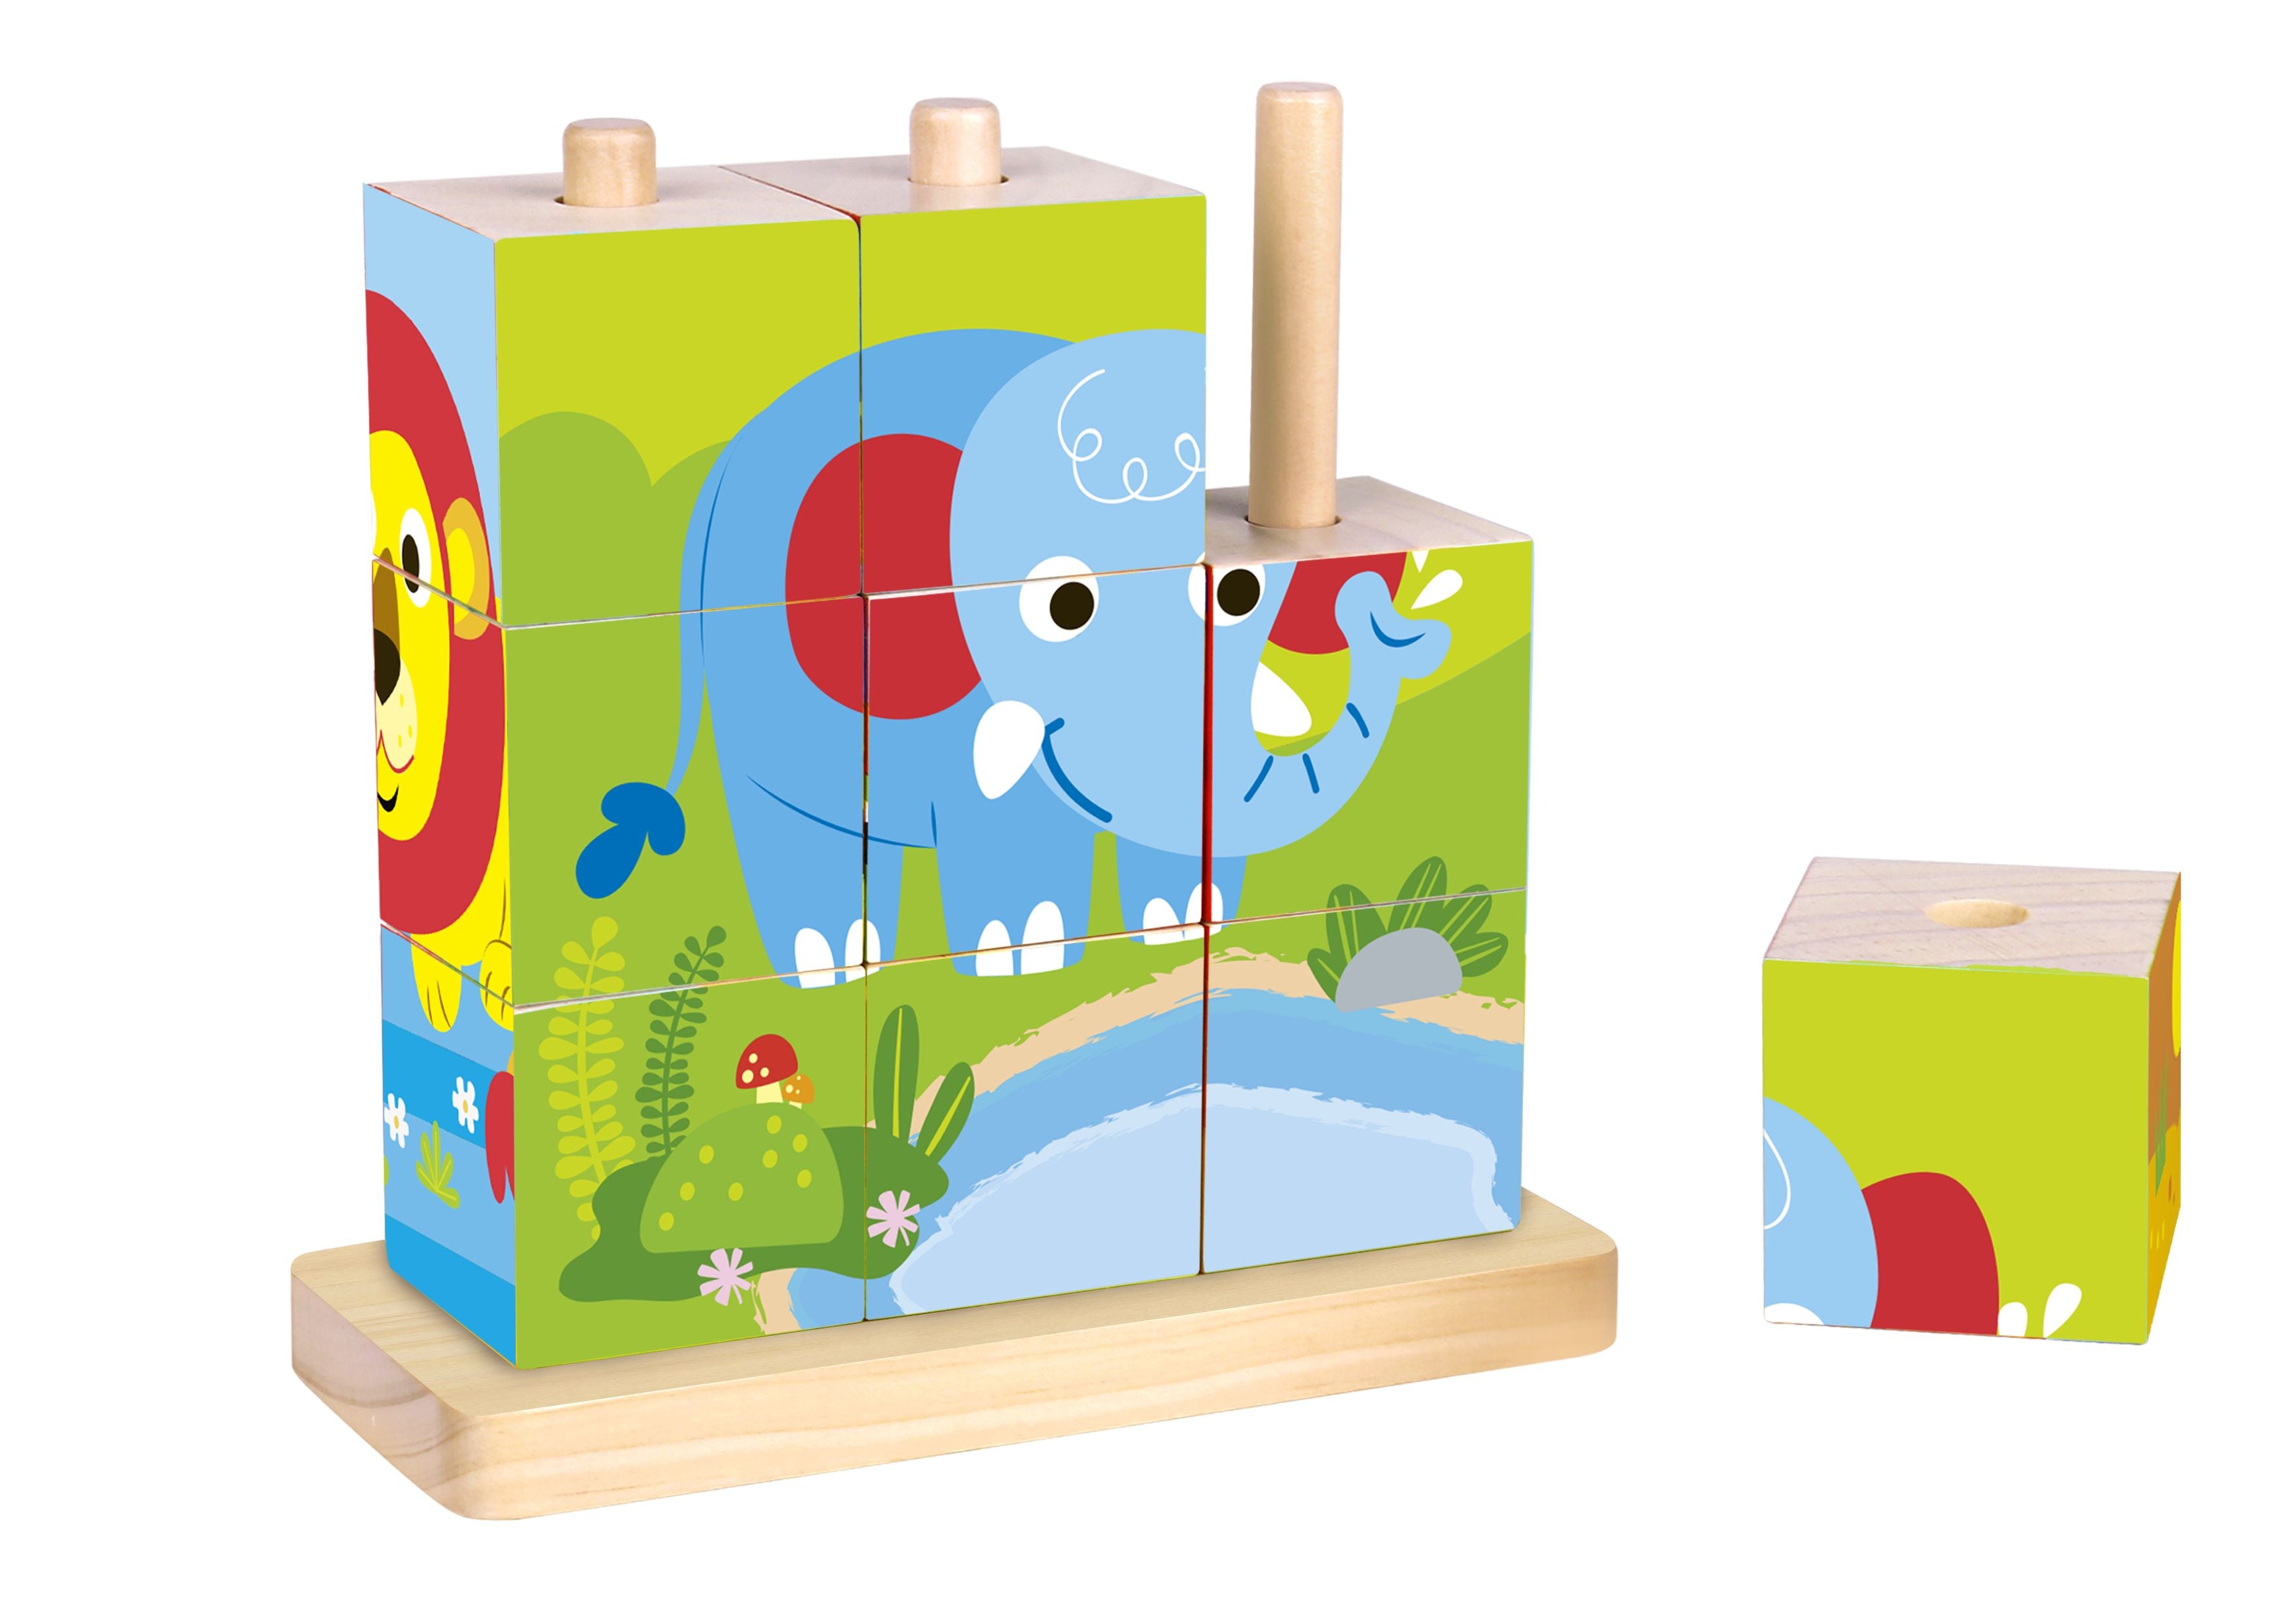 Toyster’s Wooden Colorful Safari Building Blocks Puzzle